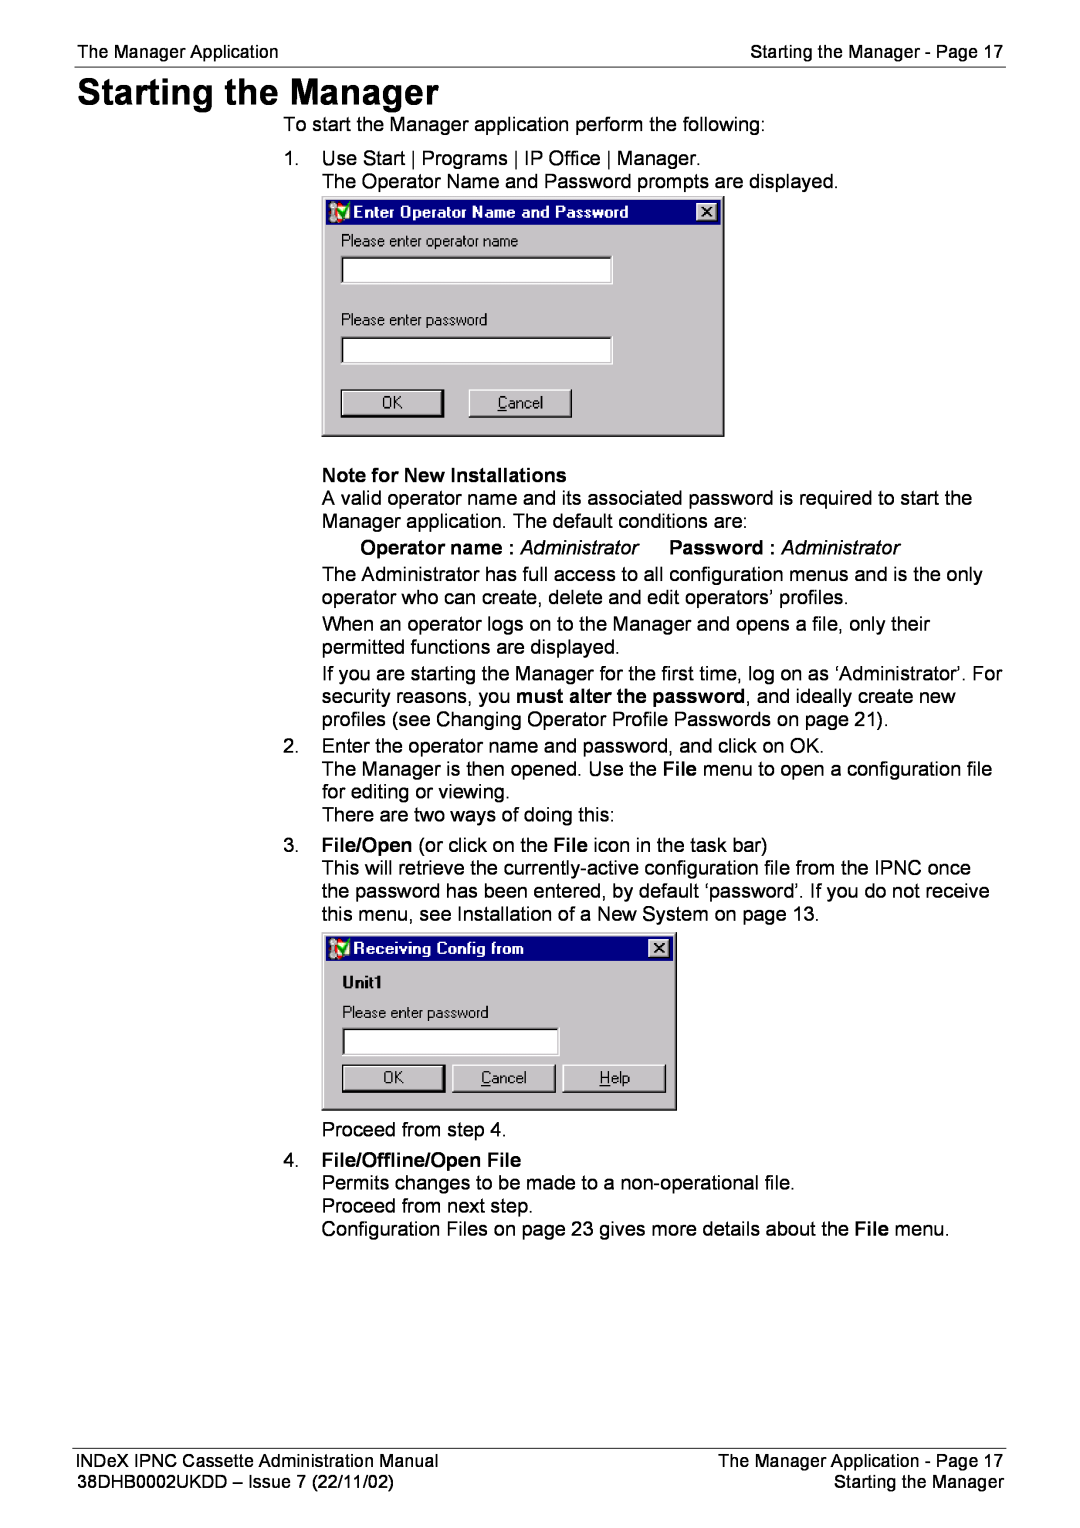 Avaya 38DHB0002UKDD manual Starting the Manager, Note for New Installations, File/Offline/Open File 